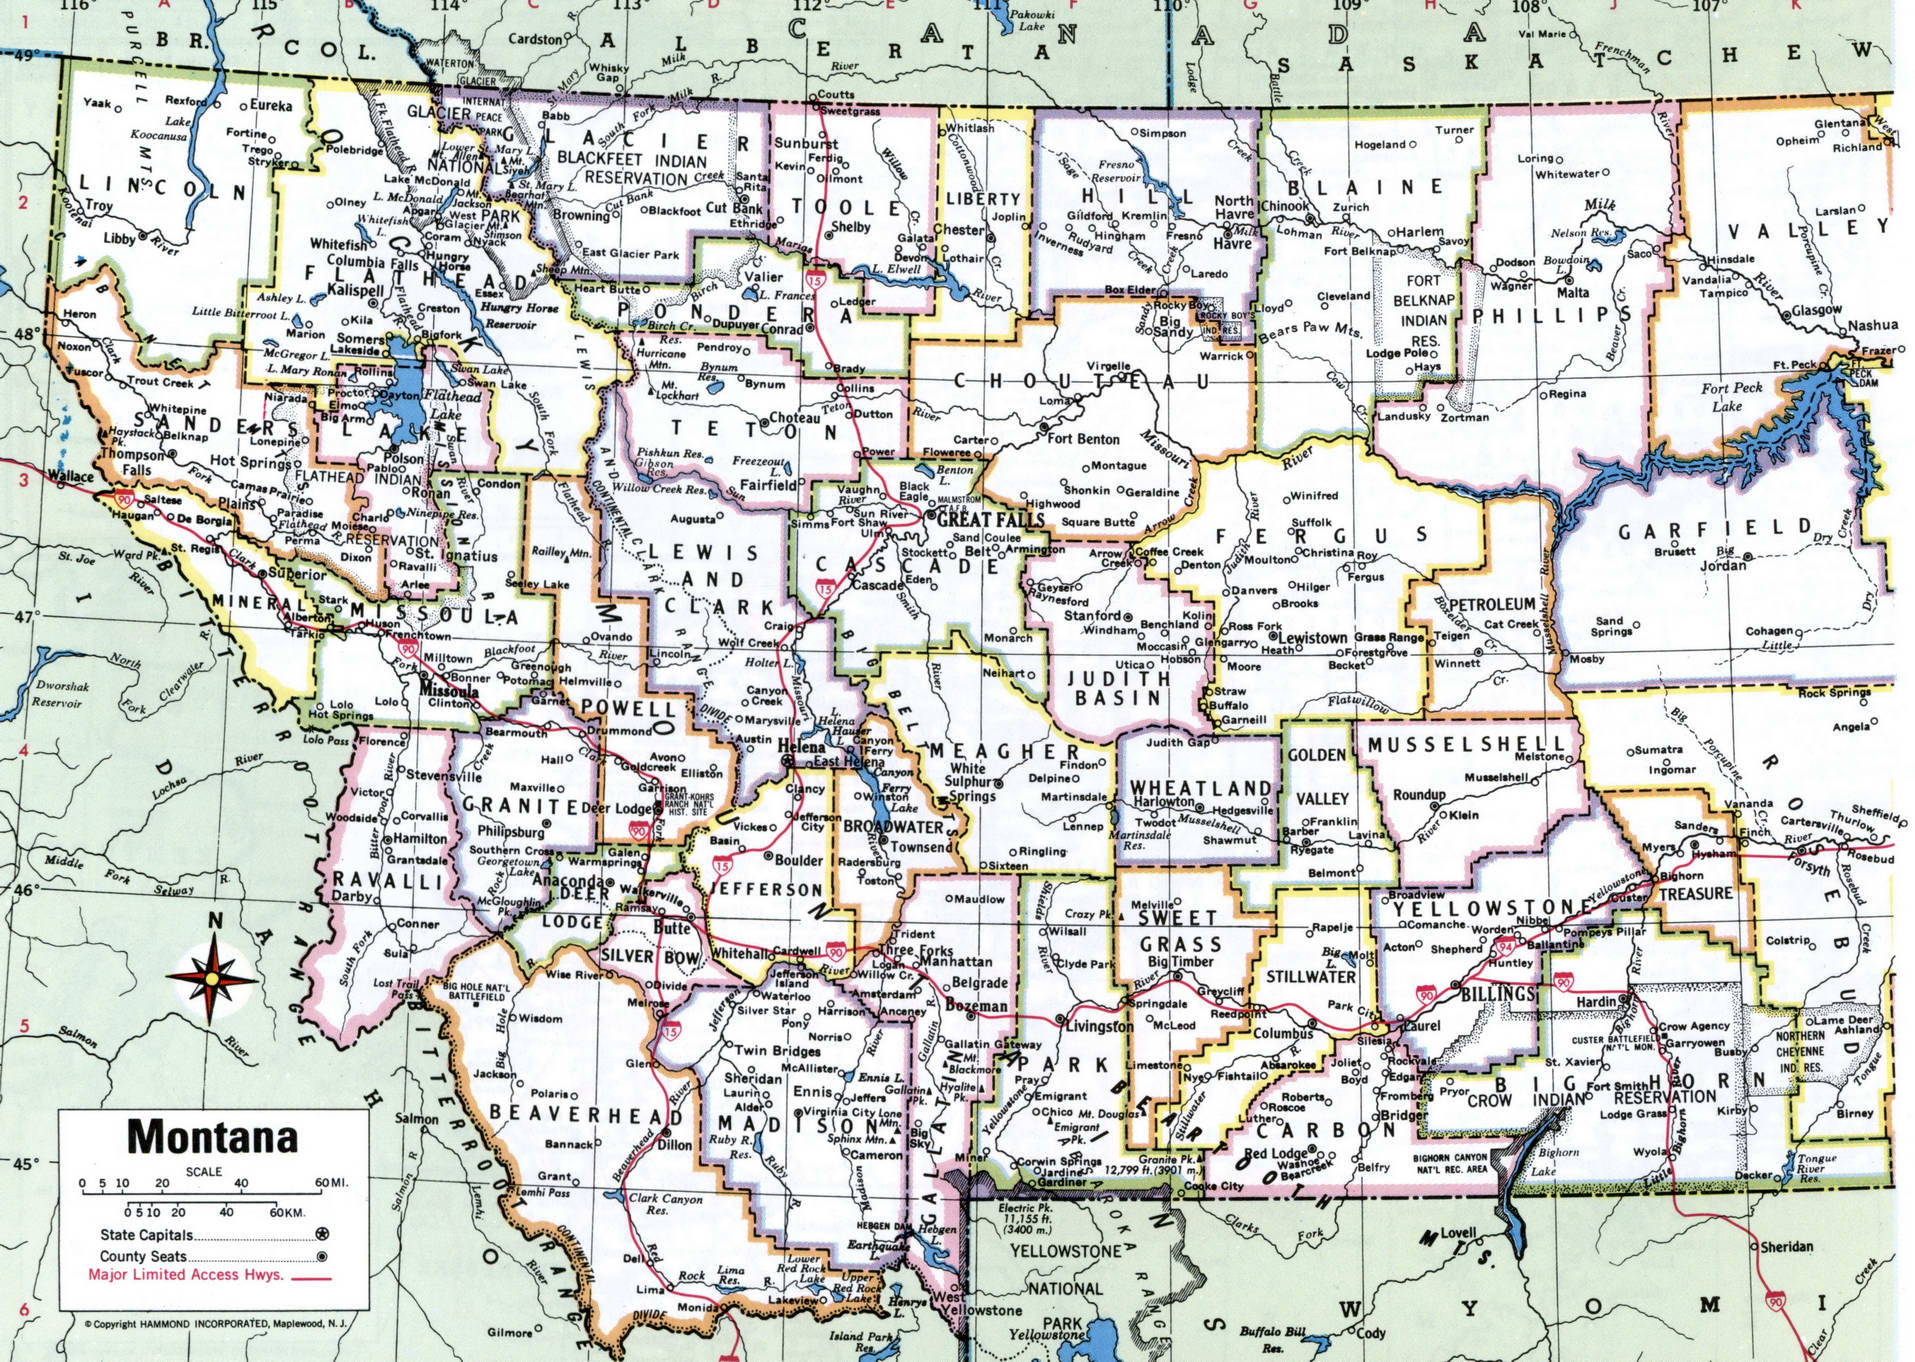 Montana map with counties